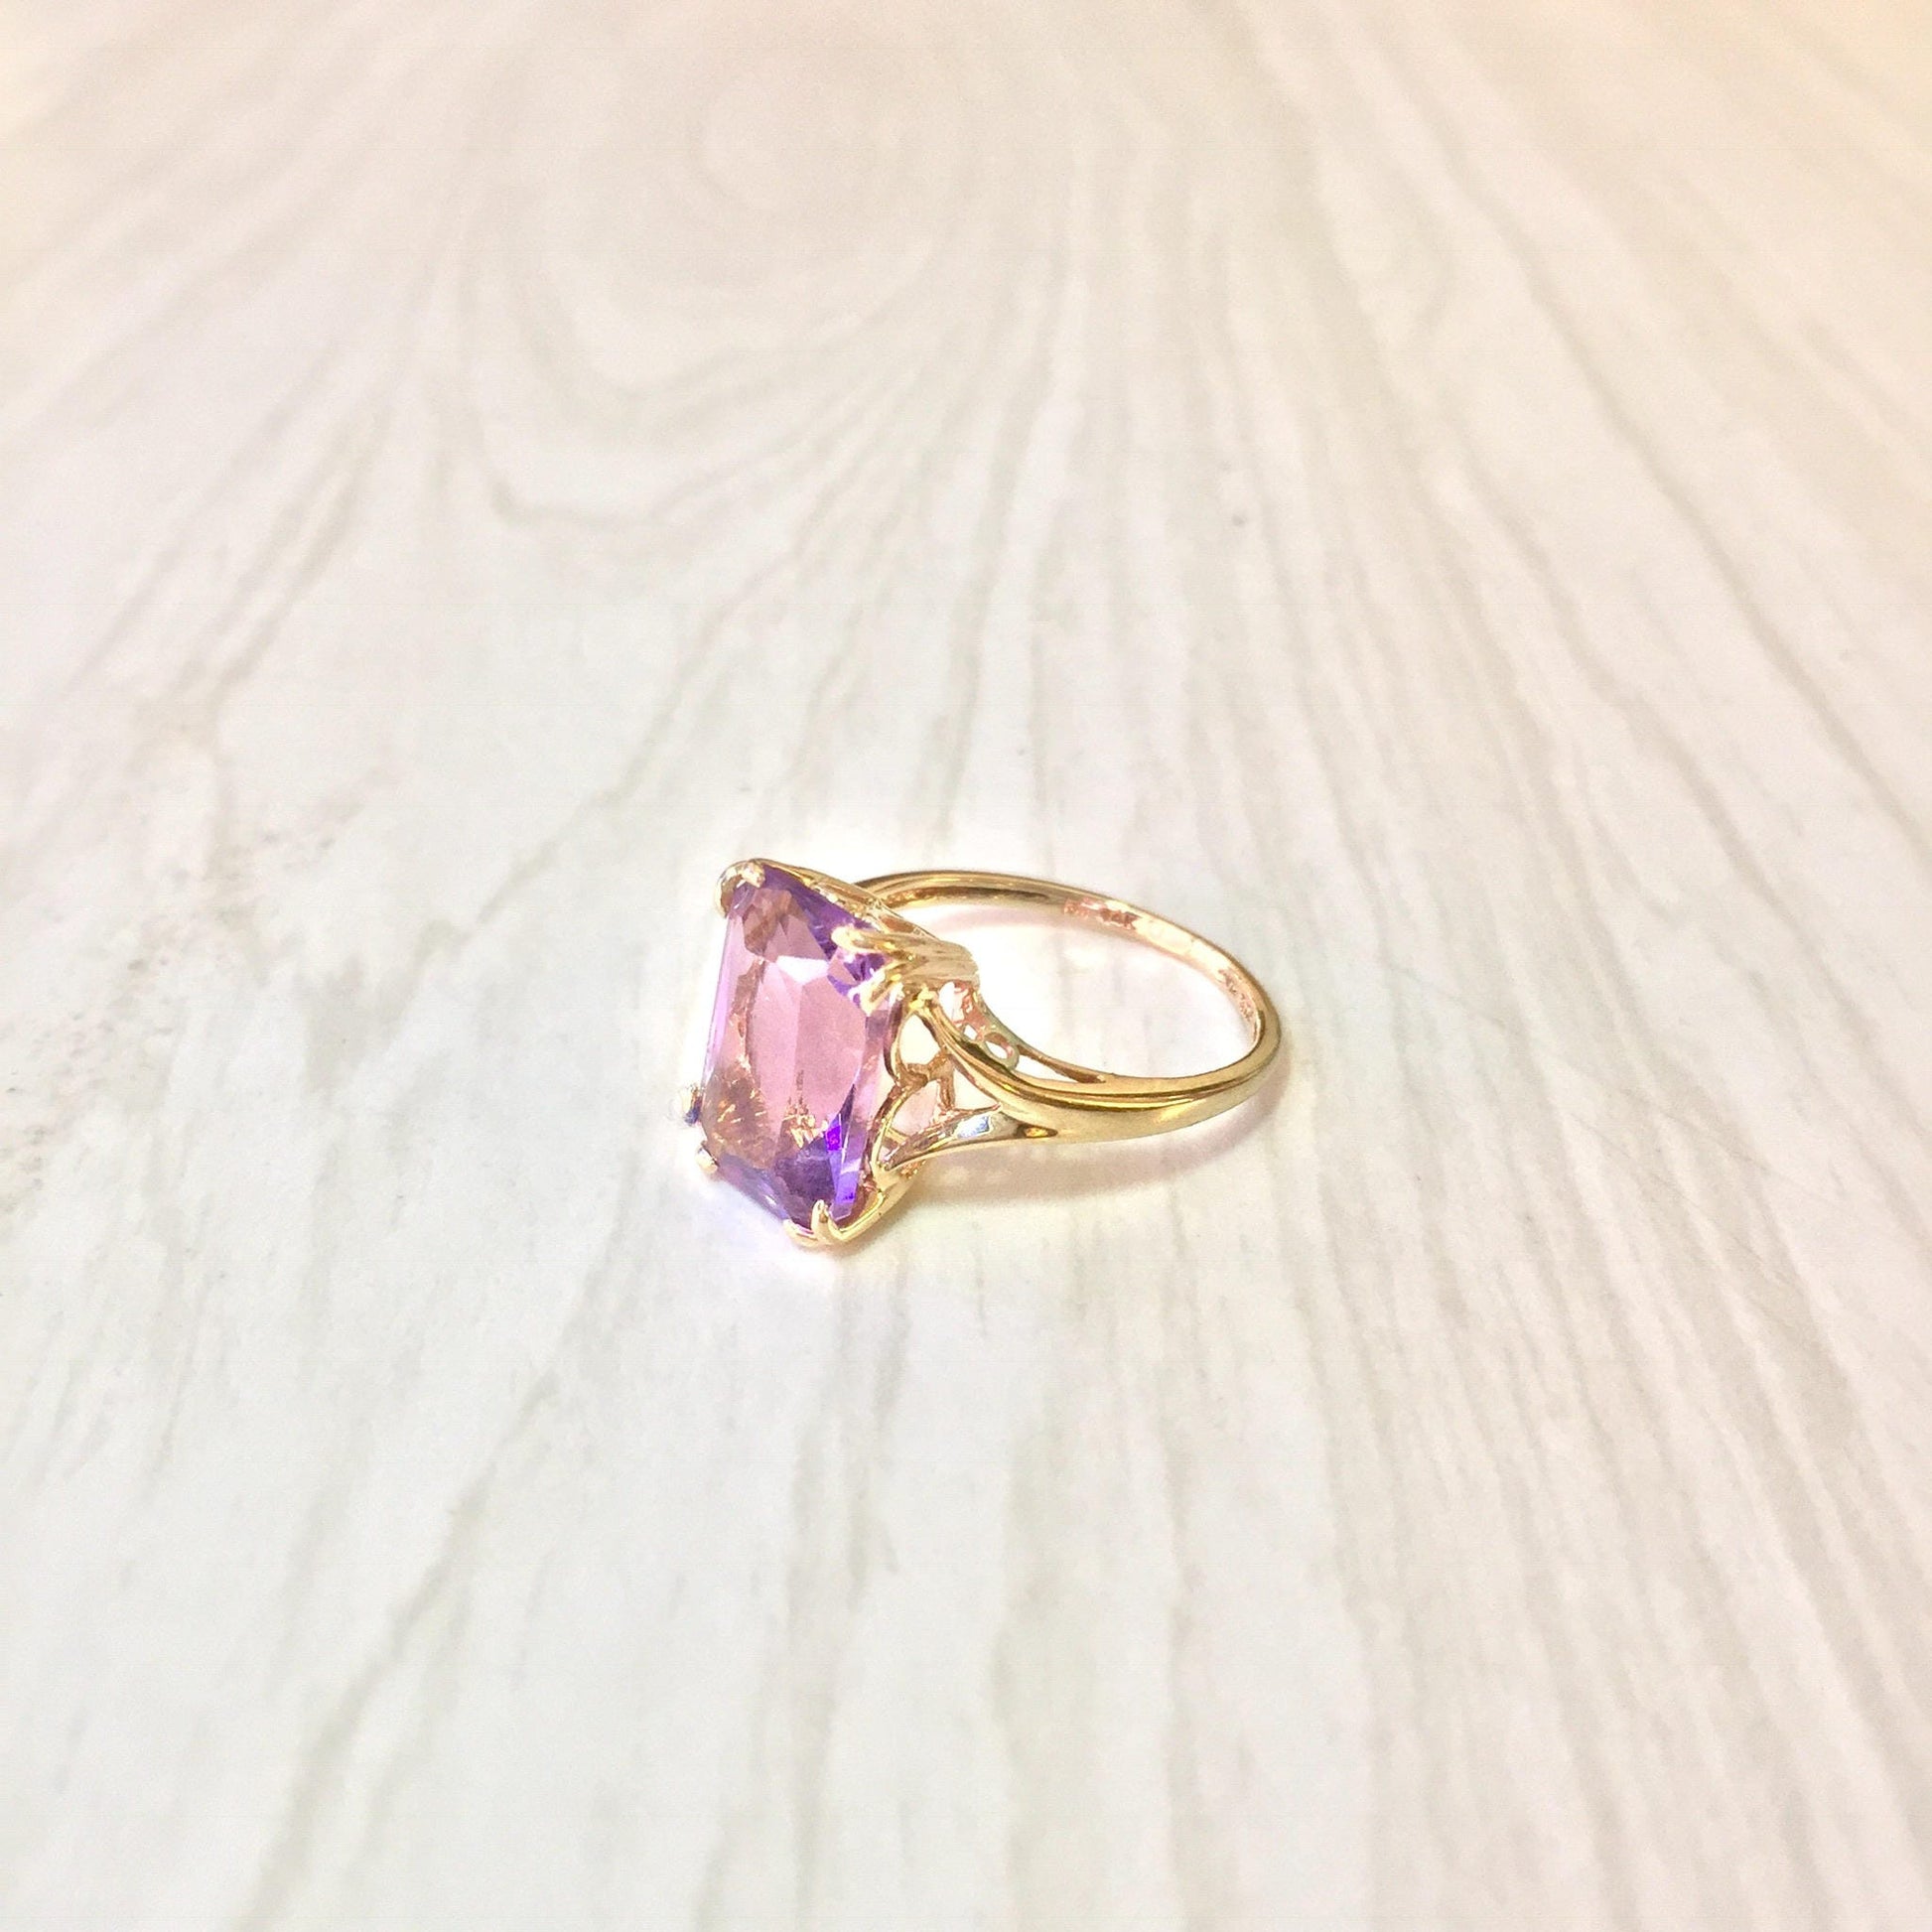 14 karat gold ring with an emerald cut amethyst gemstone on a light colored textured background